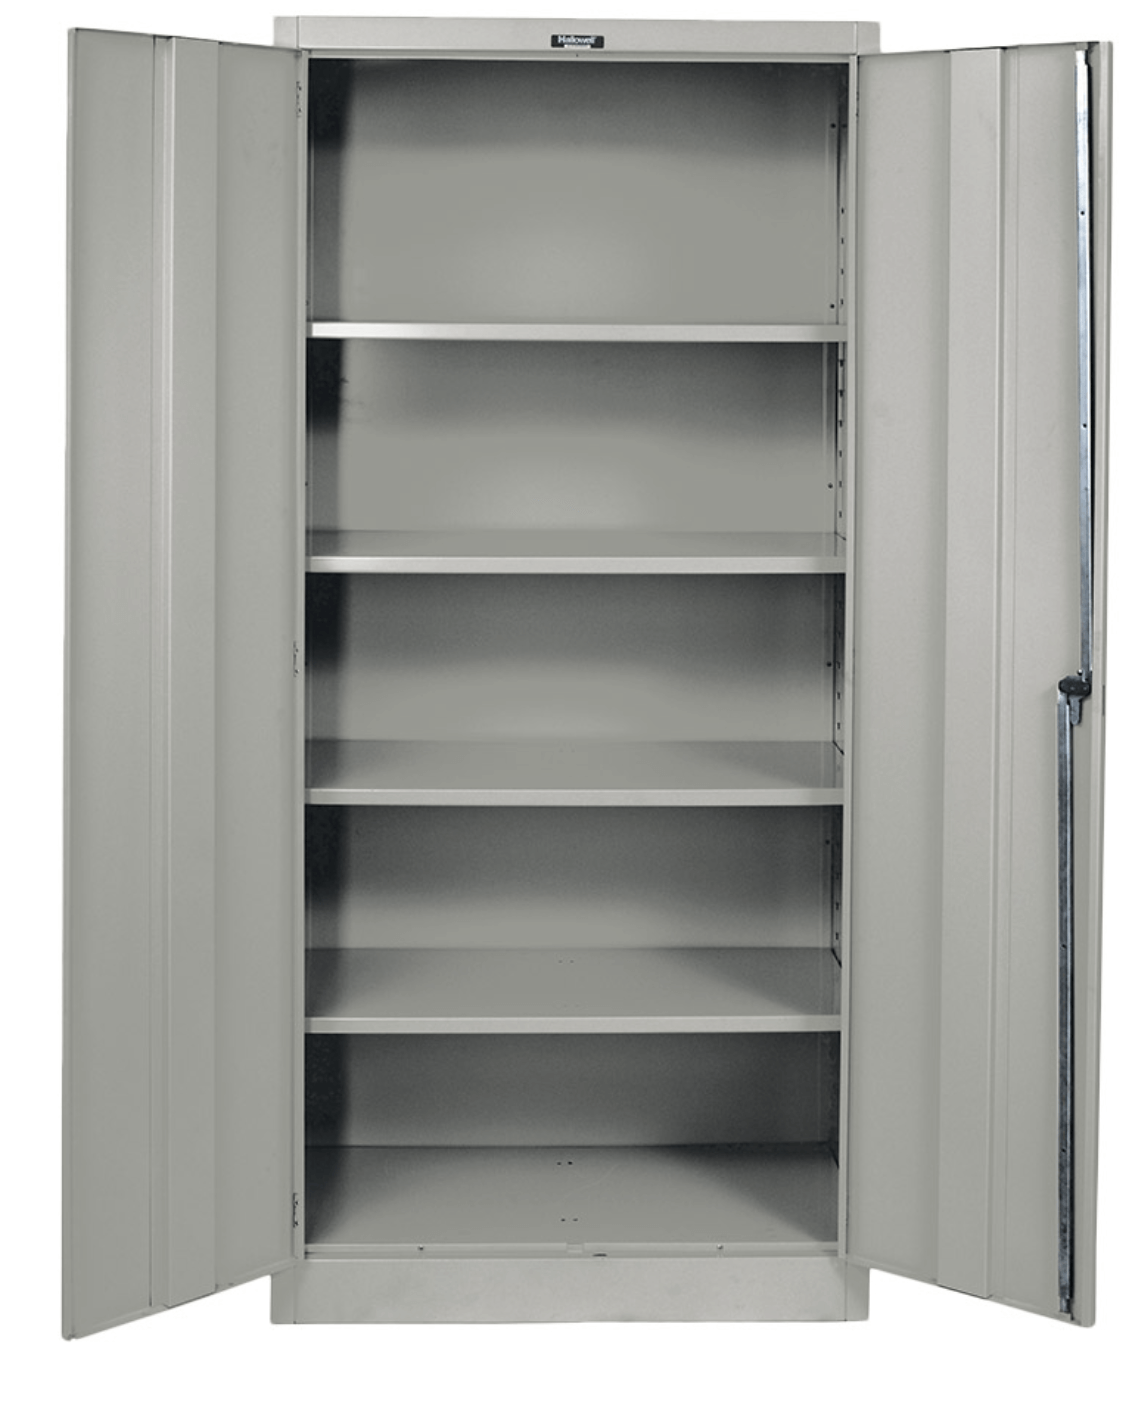 Stainless steel industrial cabinet